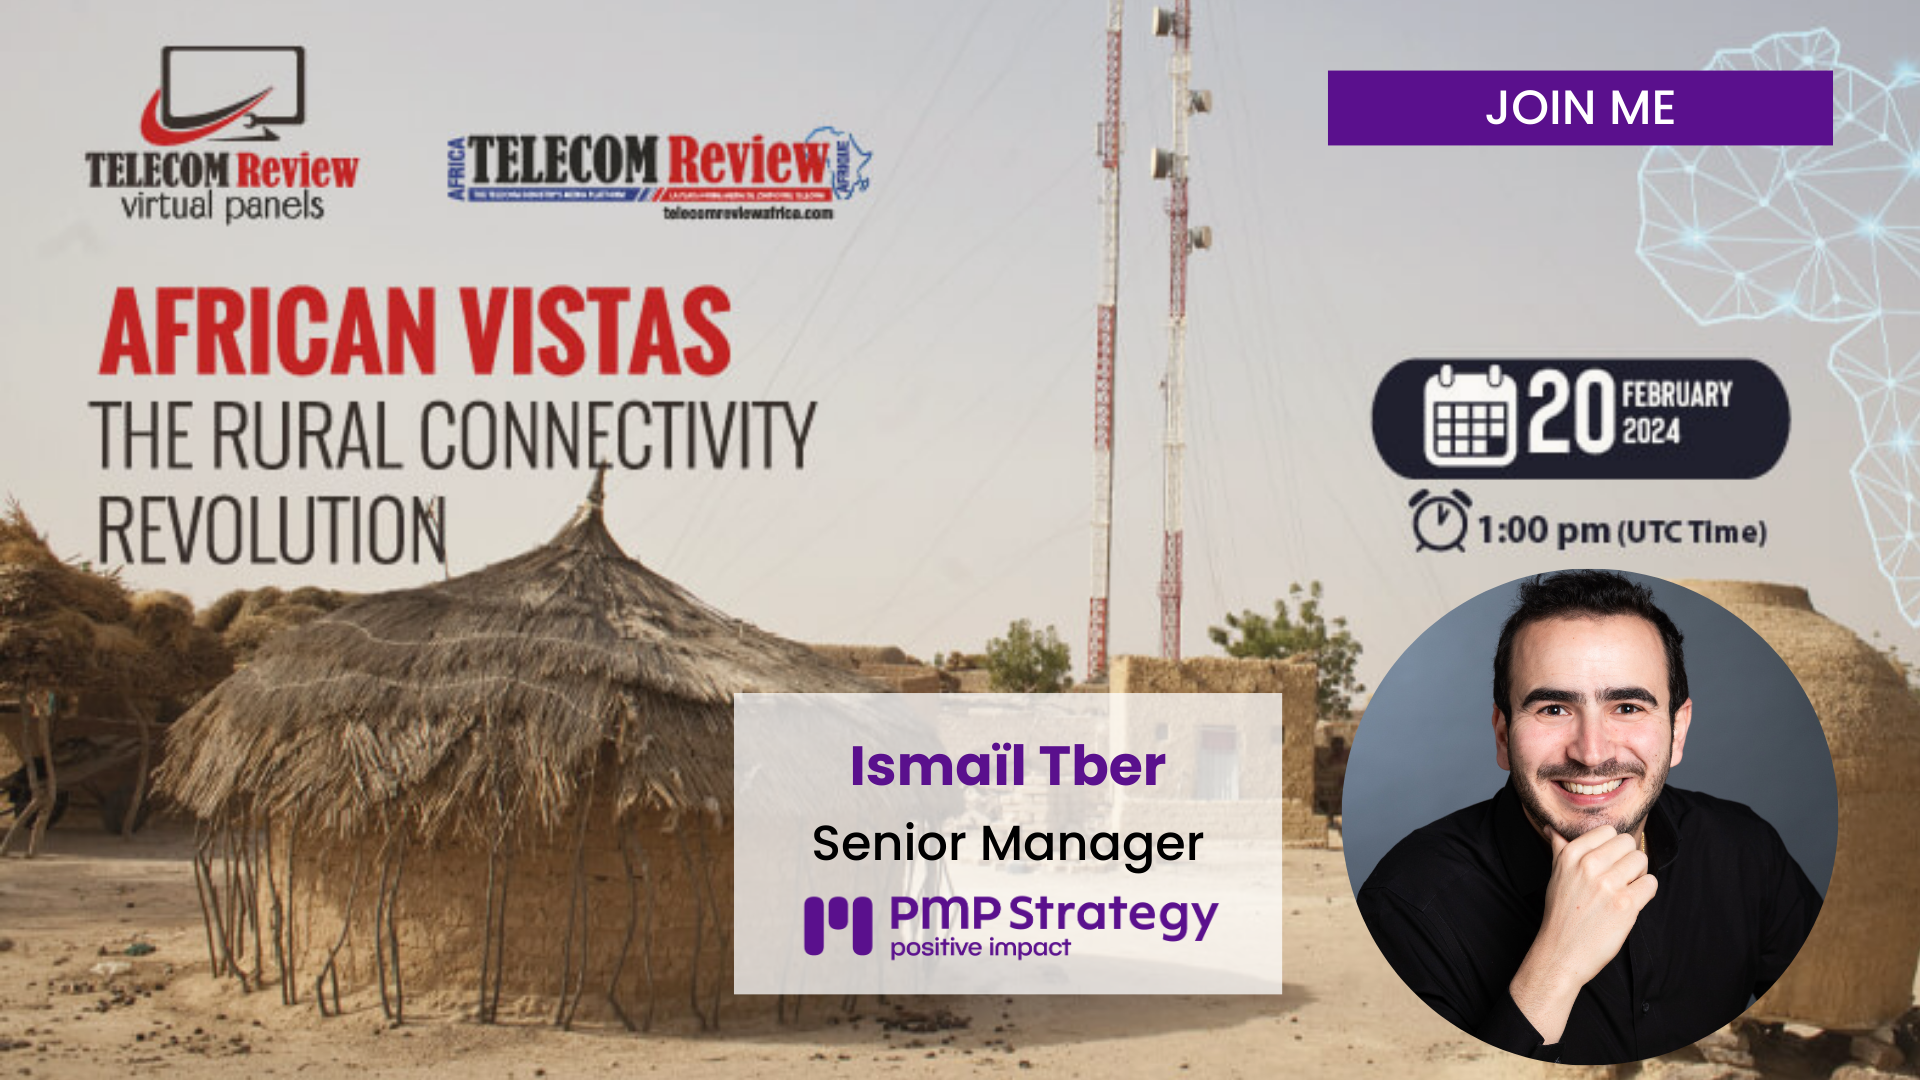 Webinar: Africa’s Rural Connectivity Revolution: Register Now for In-Depth Insights on February 20th 1PM (UTC time)